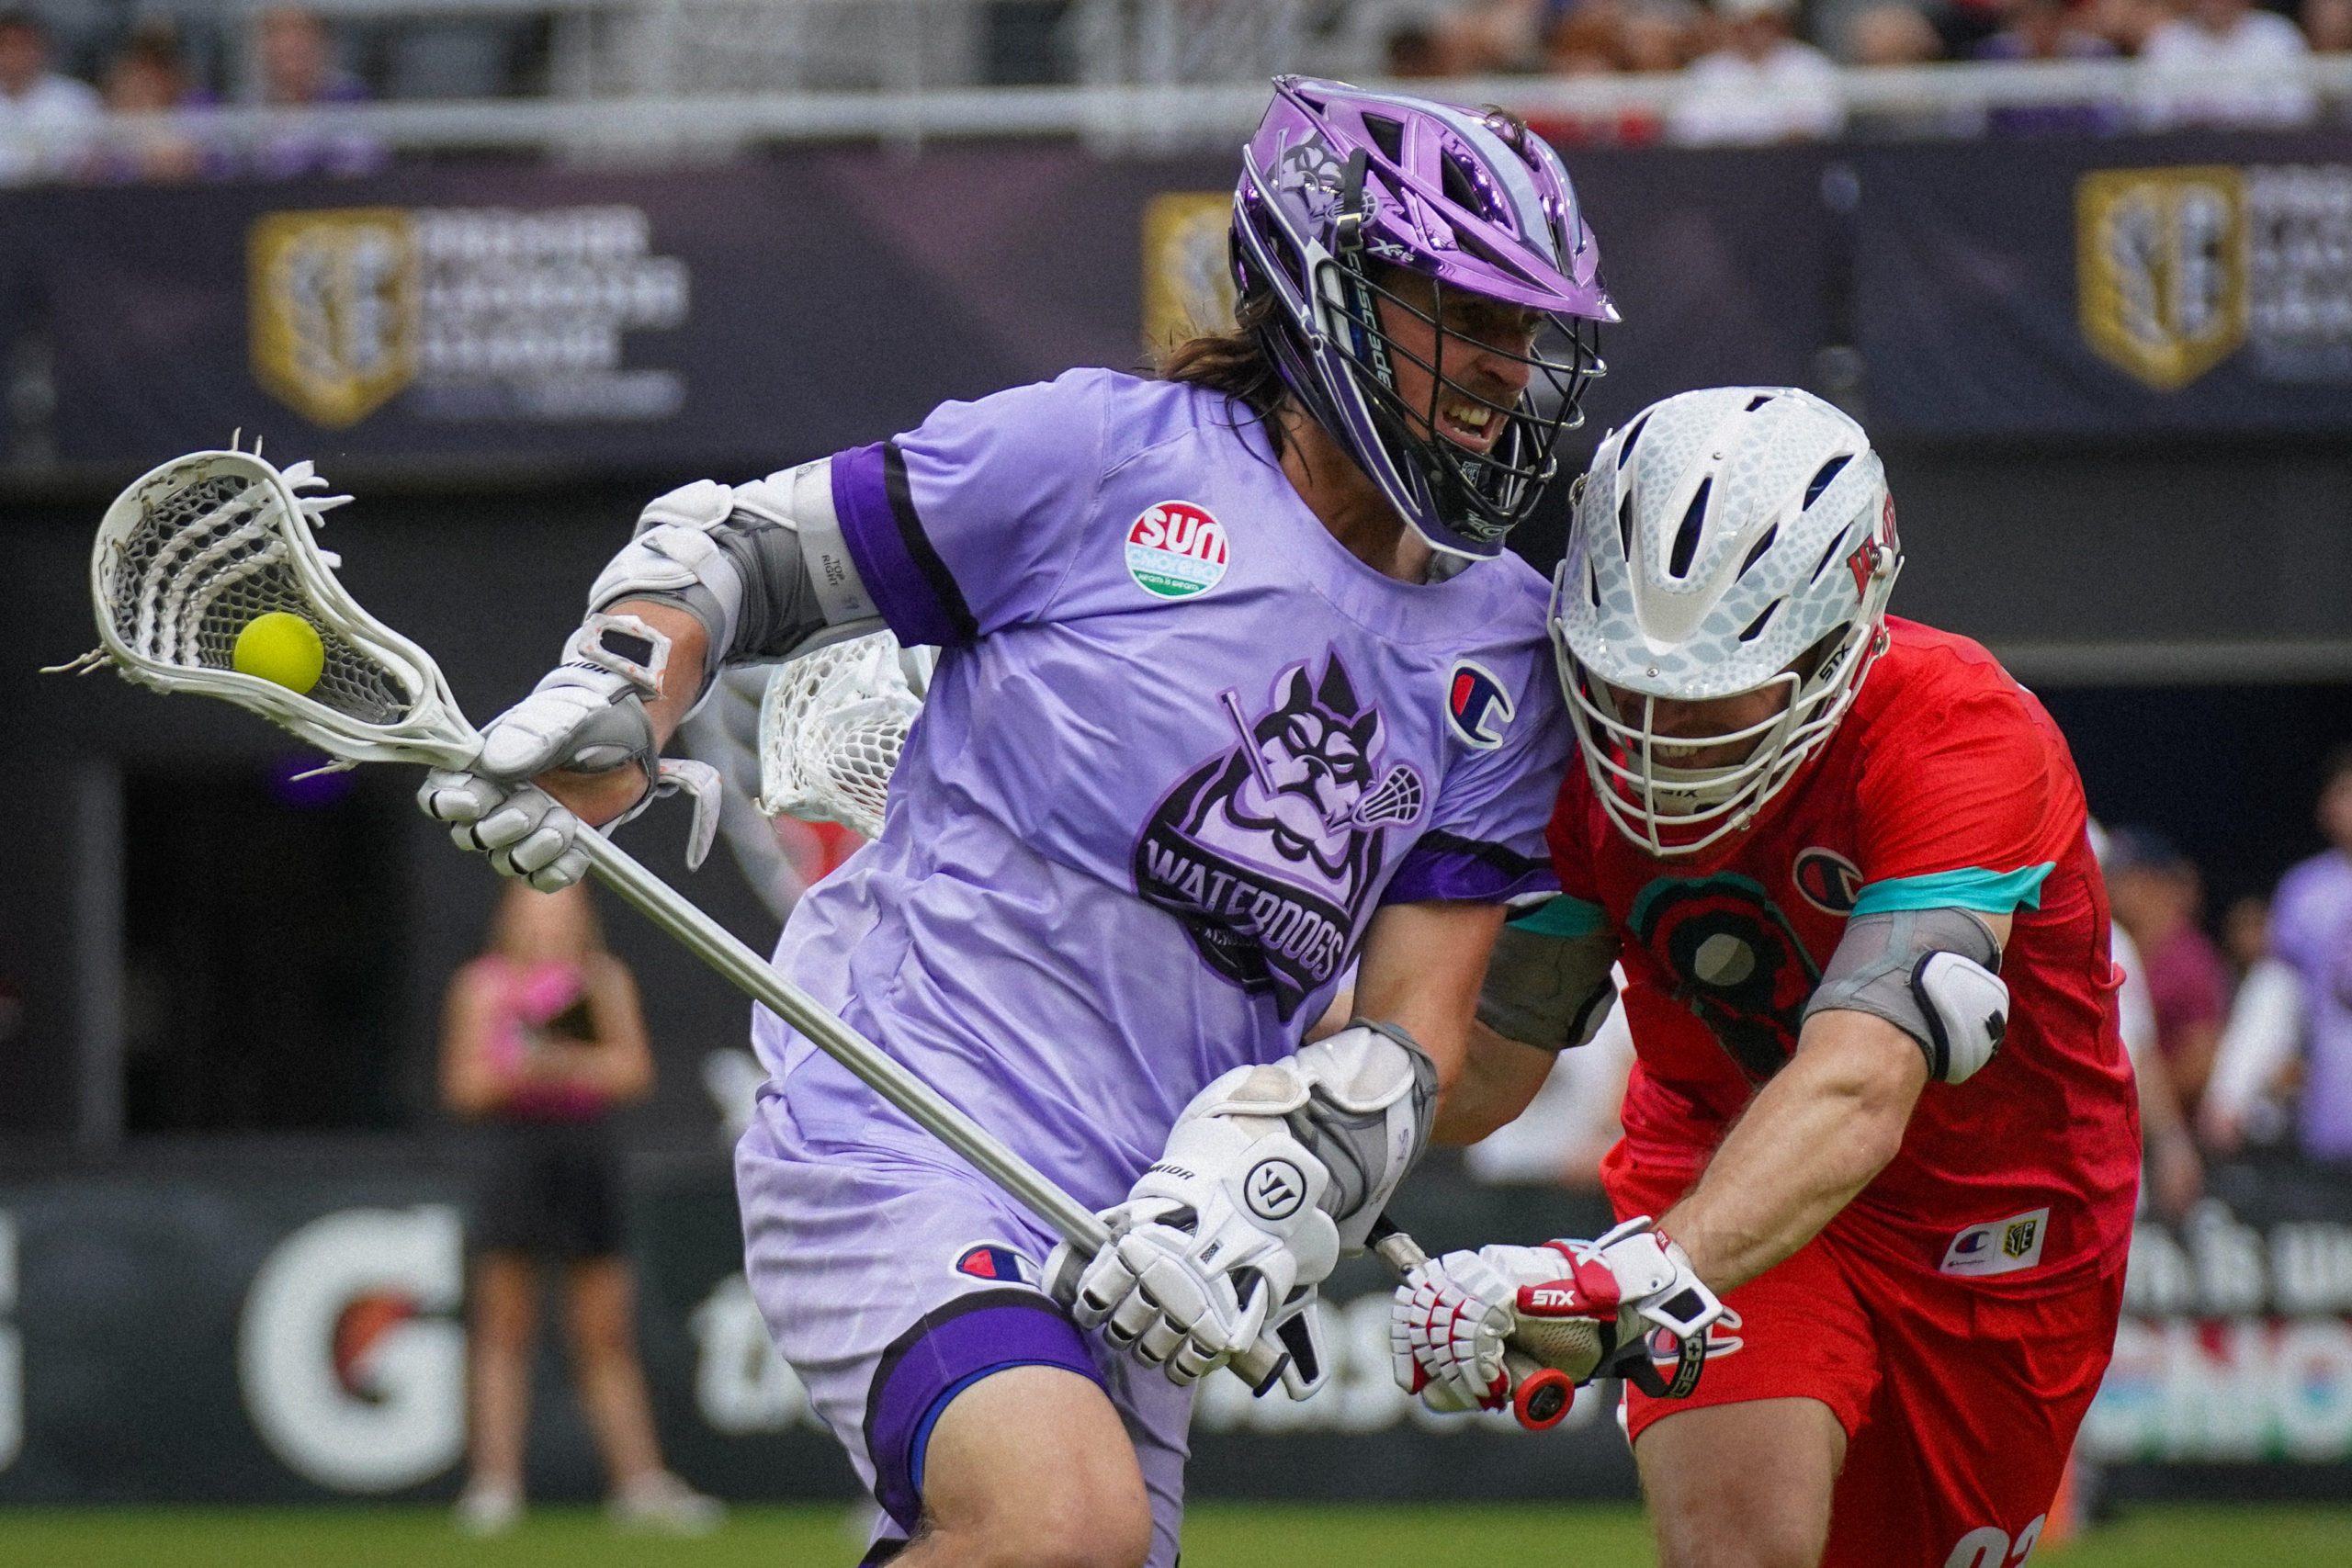 The State of the Premier Lacrosse League Entering Year 4